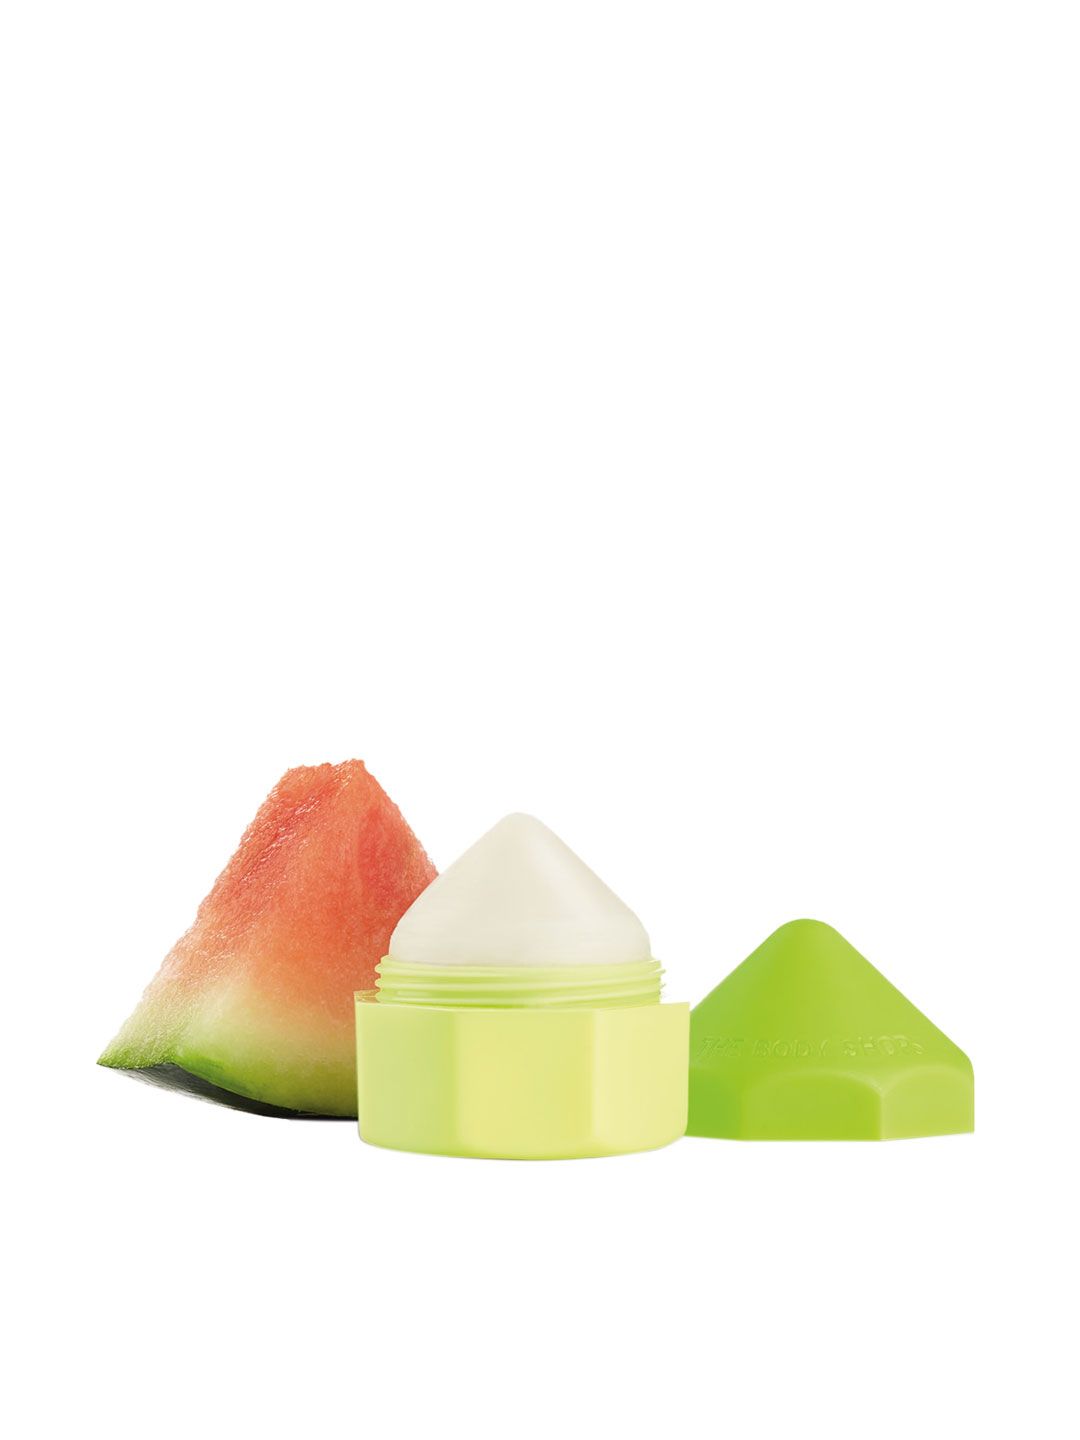 THE BODY SHOP Sustainable Lip Juicers Kale & Watermelon 4 g Price in India